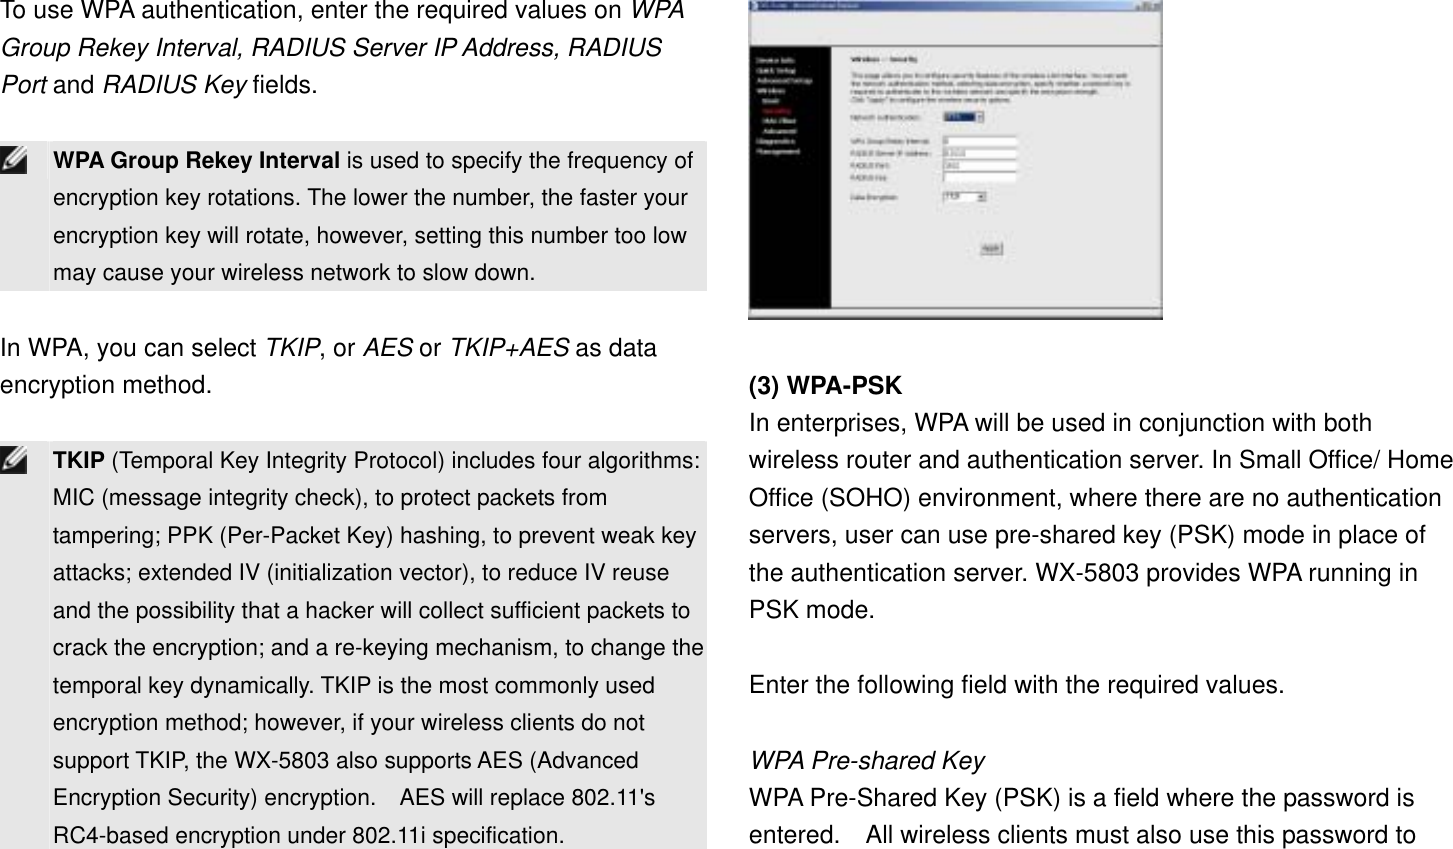 To use WPA authentication, enter the required values on WPA Group Rekey Interval, RADIUS Server IP Address, RADIUS Port and RADIUS Key fields.   WPA Group Rekey Interval is used to specify the frequency of encryption key rotations. The lower the number, the faster your encryption key will rotate, however, setting this number too low may cause your wireless network to slow down.  In WPA, you can select TKIP, or AES or TKIP+AES as data encryption method.   TKIP (Temporal Key Integrity Protocol) includes four algorithms: MIC (message integrity check), to protect packets from tampering; PPK (Per-Packet Key) hashing, to prevent weak key attacks; extended IV (initialization vector), to reduce IV reuse and the possibility that a hacker will collect sufficient packets to crack the encryption; and a re-keying mechanism, to change the temporal key dynamically. TKIP is the most commonly used encryption method; however, if your wireless clients do not support TKIP, the WX-5803 also supports AES (Advanced Encryption Security) encryption.    AES will replace 802.11&apos;s RC4-based encryption under 802.11i specification.   (3) WPA-PSK In enterprises, WPA will be used in conjunction with both wireless router and authentication server. In Small Office/ Home Office (SOHO) environment, where there are no authentication servers, user can use pre-shared key (PSK) mode in place of the authentication server. WX-5803 provides WPA running in PSK mode.  Enter the following field with the required values.  WPA Pre-shared Key WPA Pre-Shared Key (PSK) is a field where the password is entered.    All wireless clients must also use this password to 